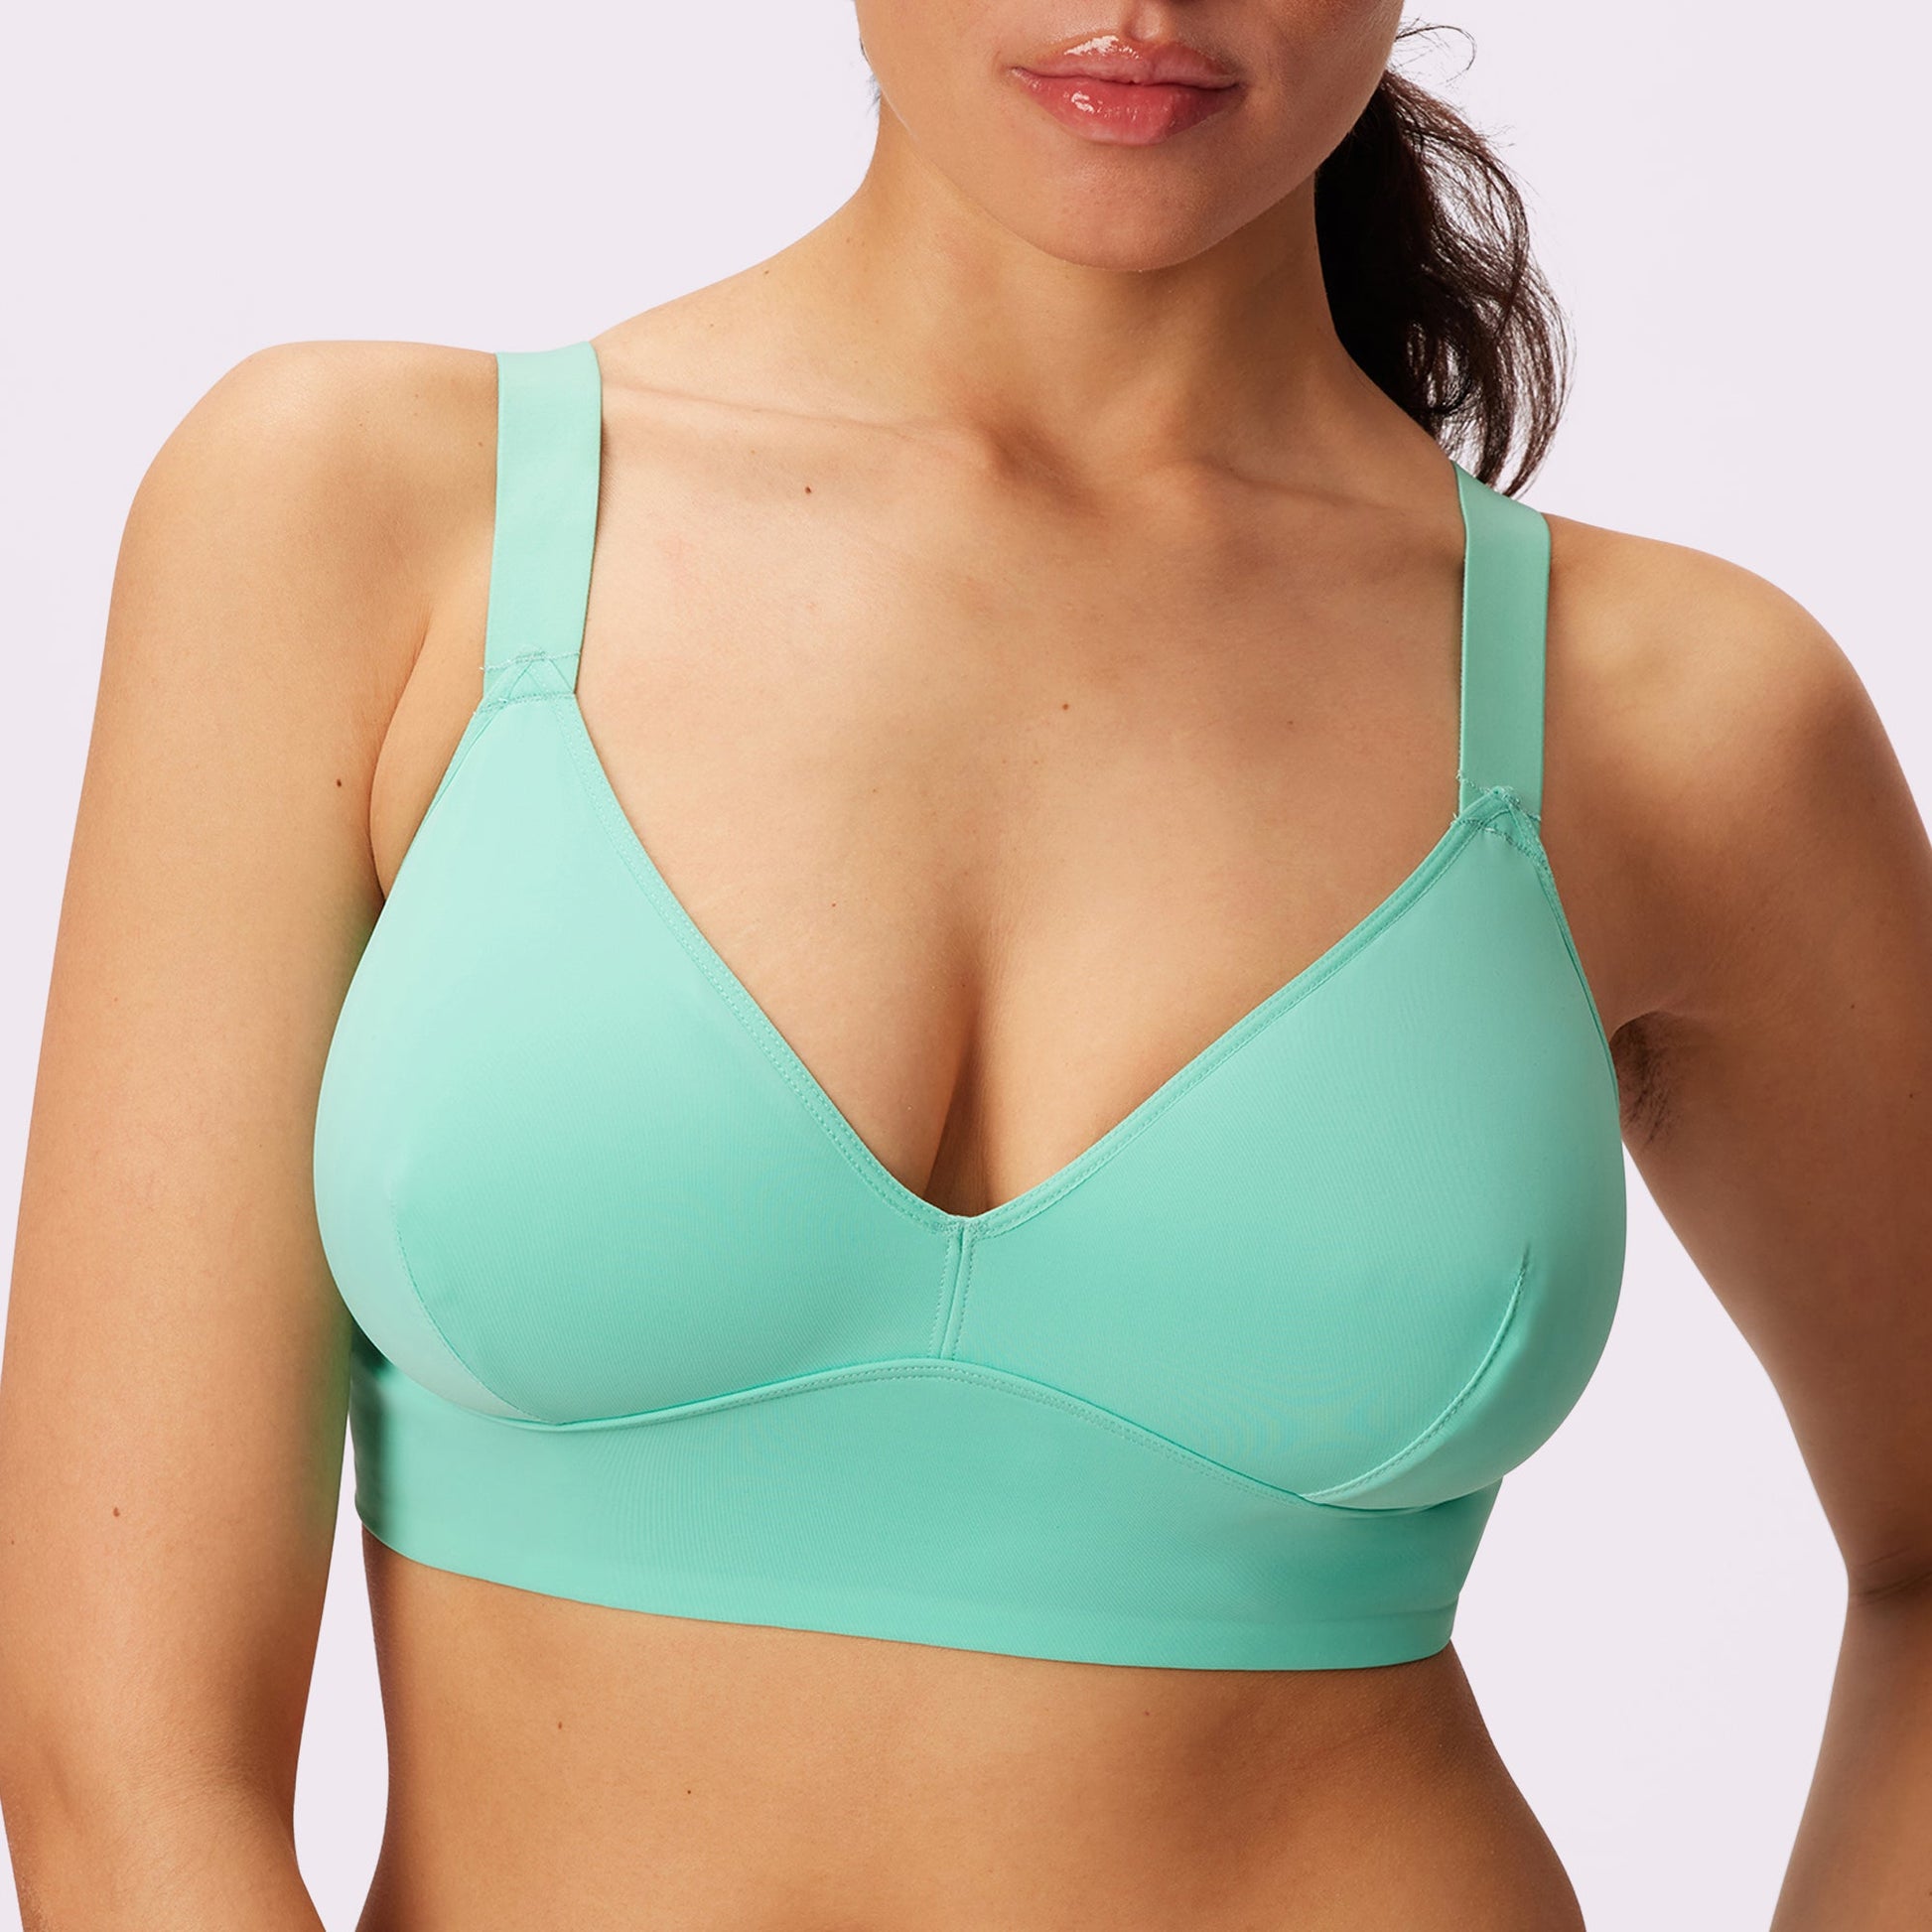 gvdentm Bralettes For Women With Support Women's Longline Sports